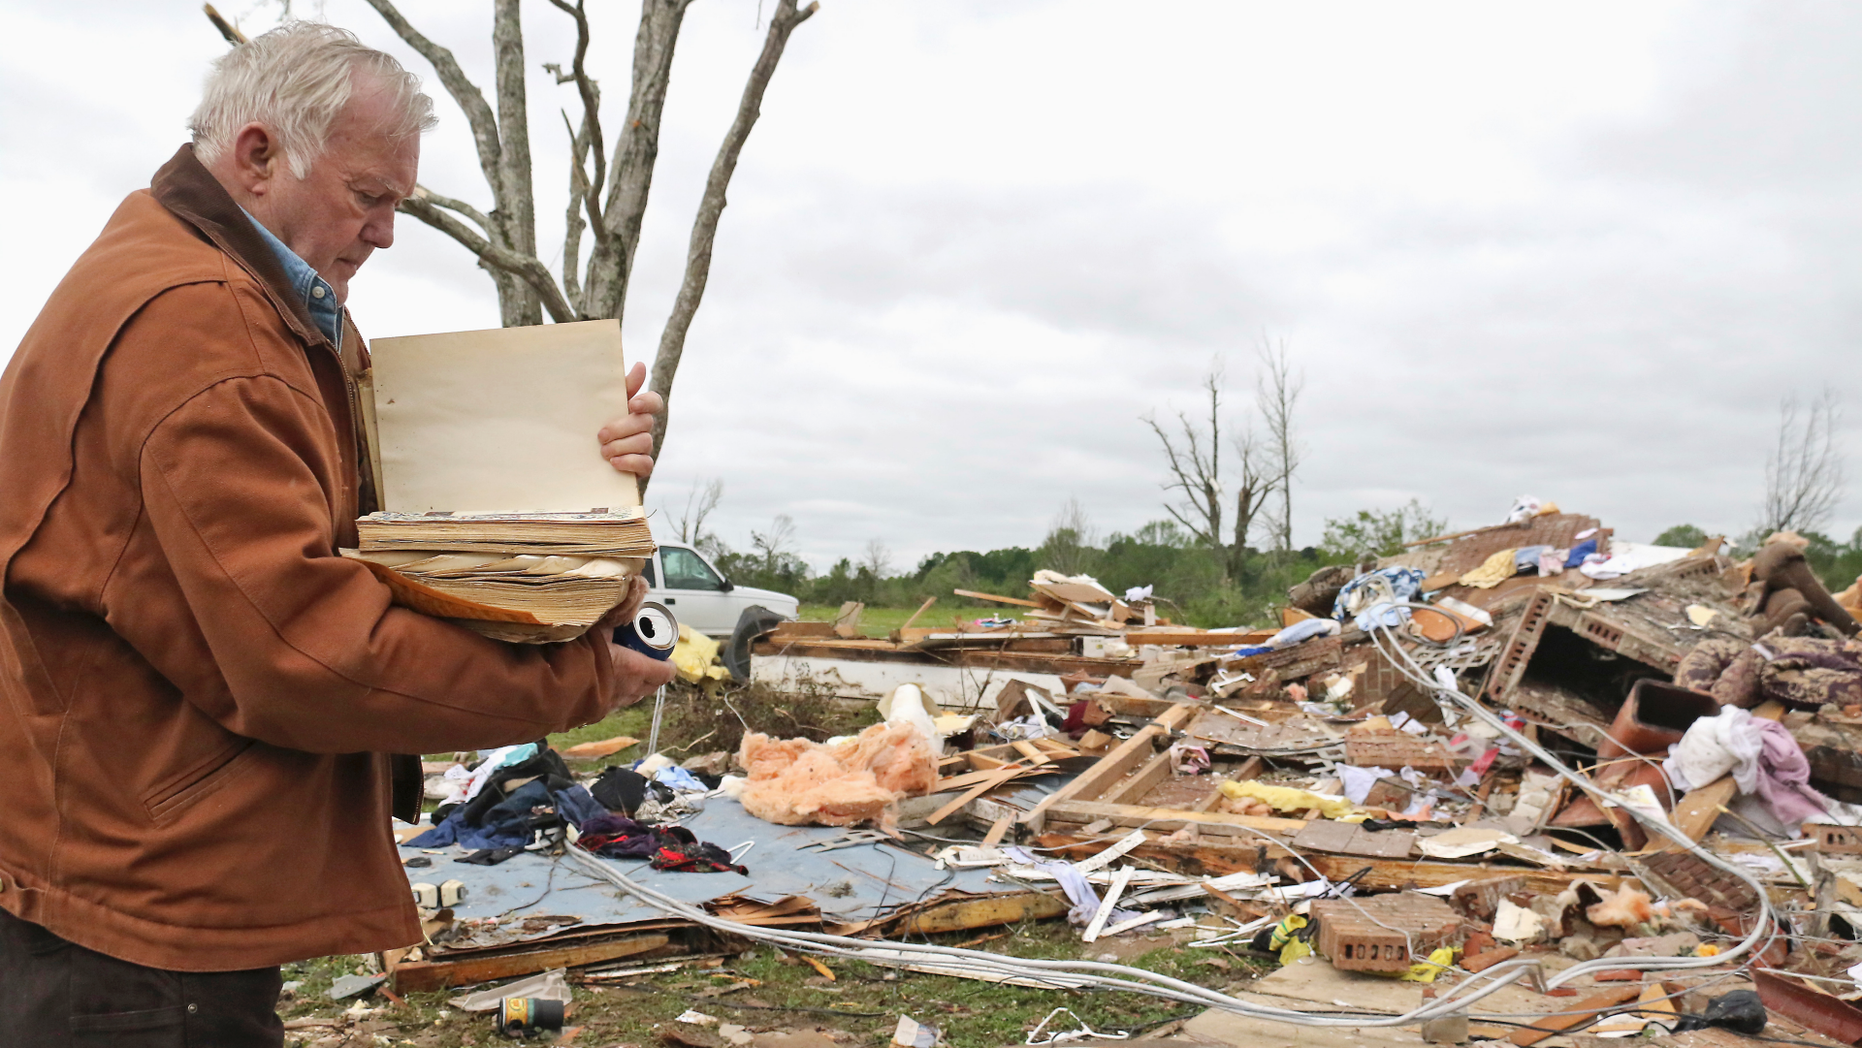 Robert Scott examines a family Bible that he just came out of the rubble on Sunday, April 14, 2019, from his home at Seely Drive, outside of Hamilton, Missouri, after An apparent tornado hit Saturday night, April 13, 2019. (AP Photo / Jim Lytle)